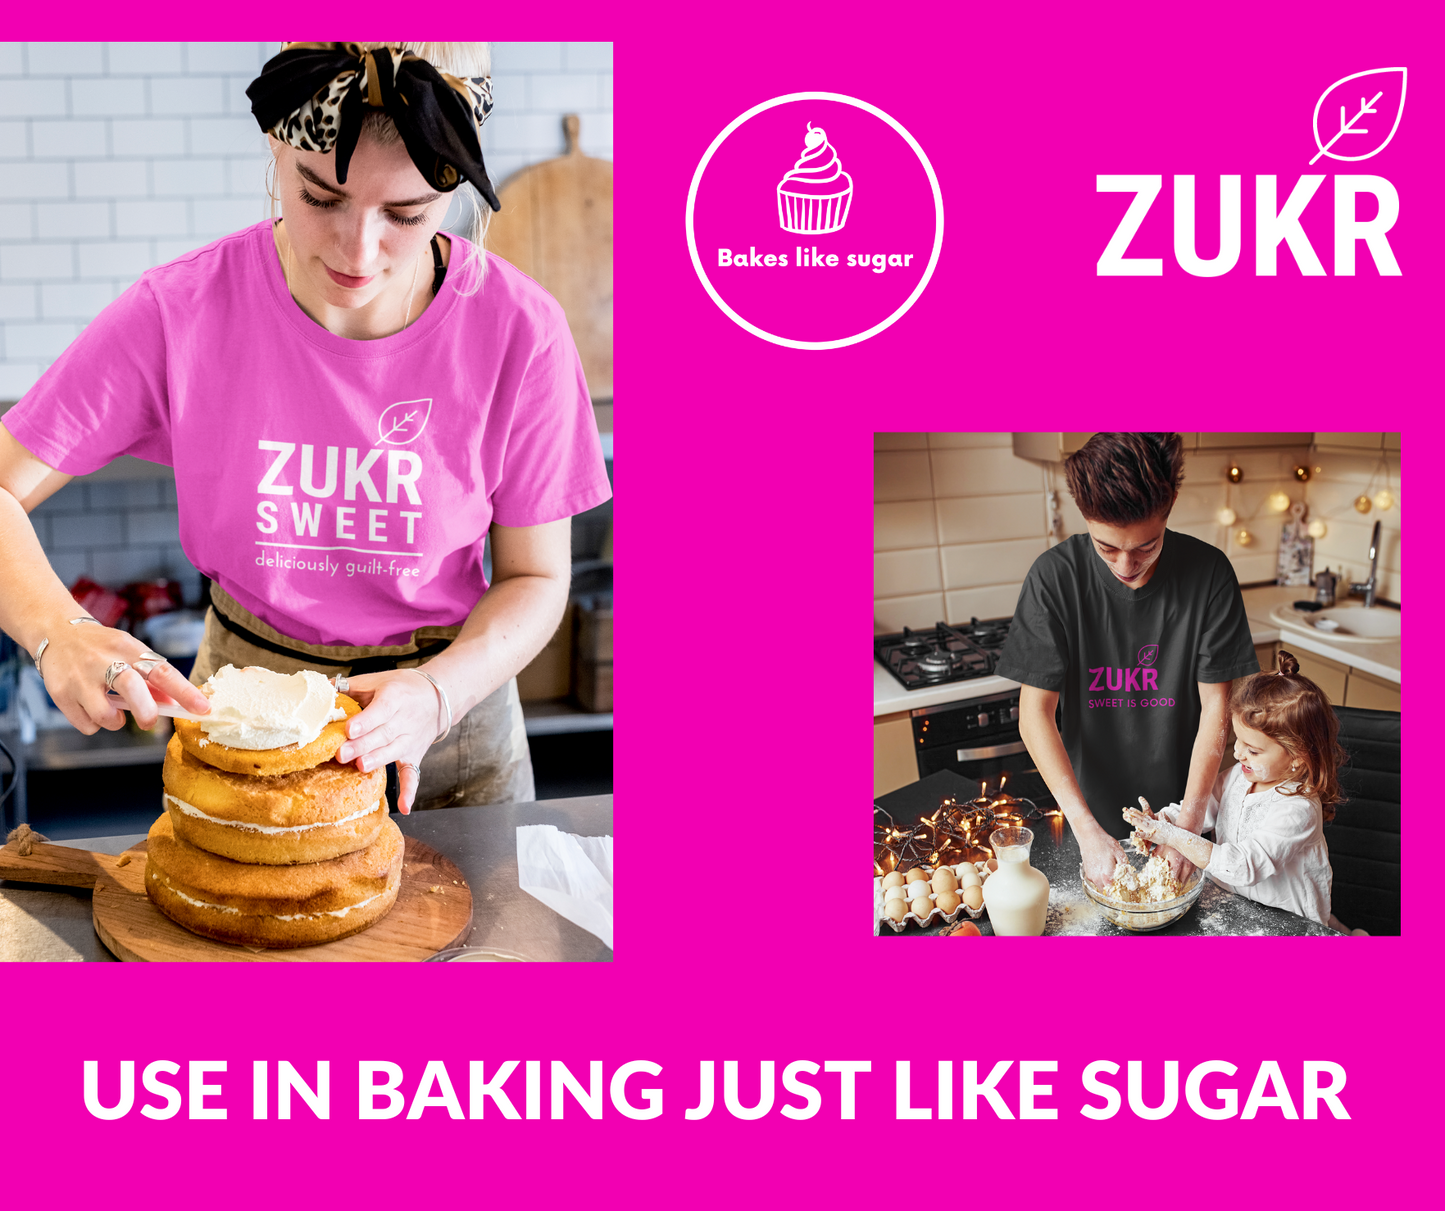 ZUKR Natural Organic Sugar Replacement is a perfect baking companion, adding sweetness and flavor to a variety of desserts without compromising on health goals. Indulge in guilt-free sweet treats with ZUKR Natural Organic Sugar Replacement.